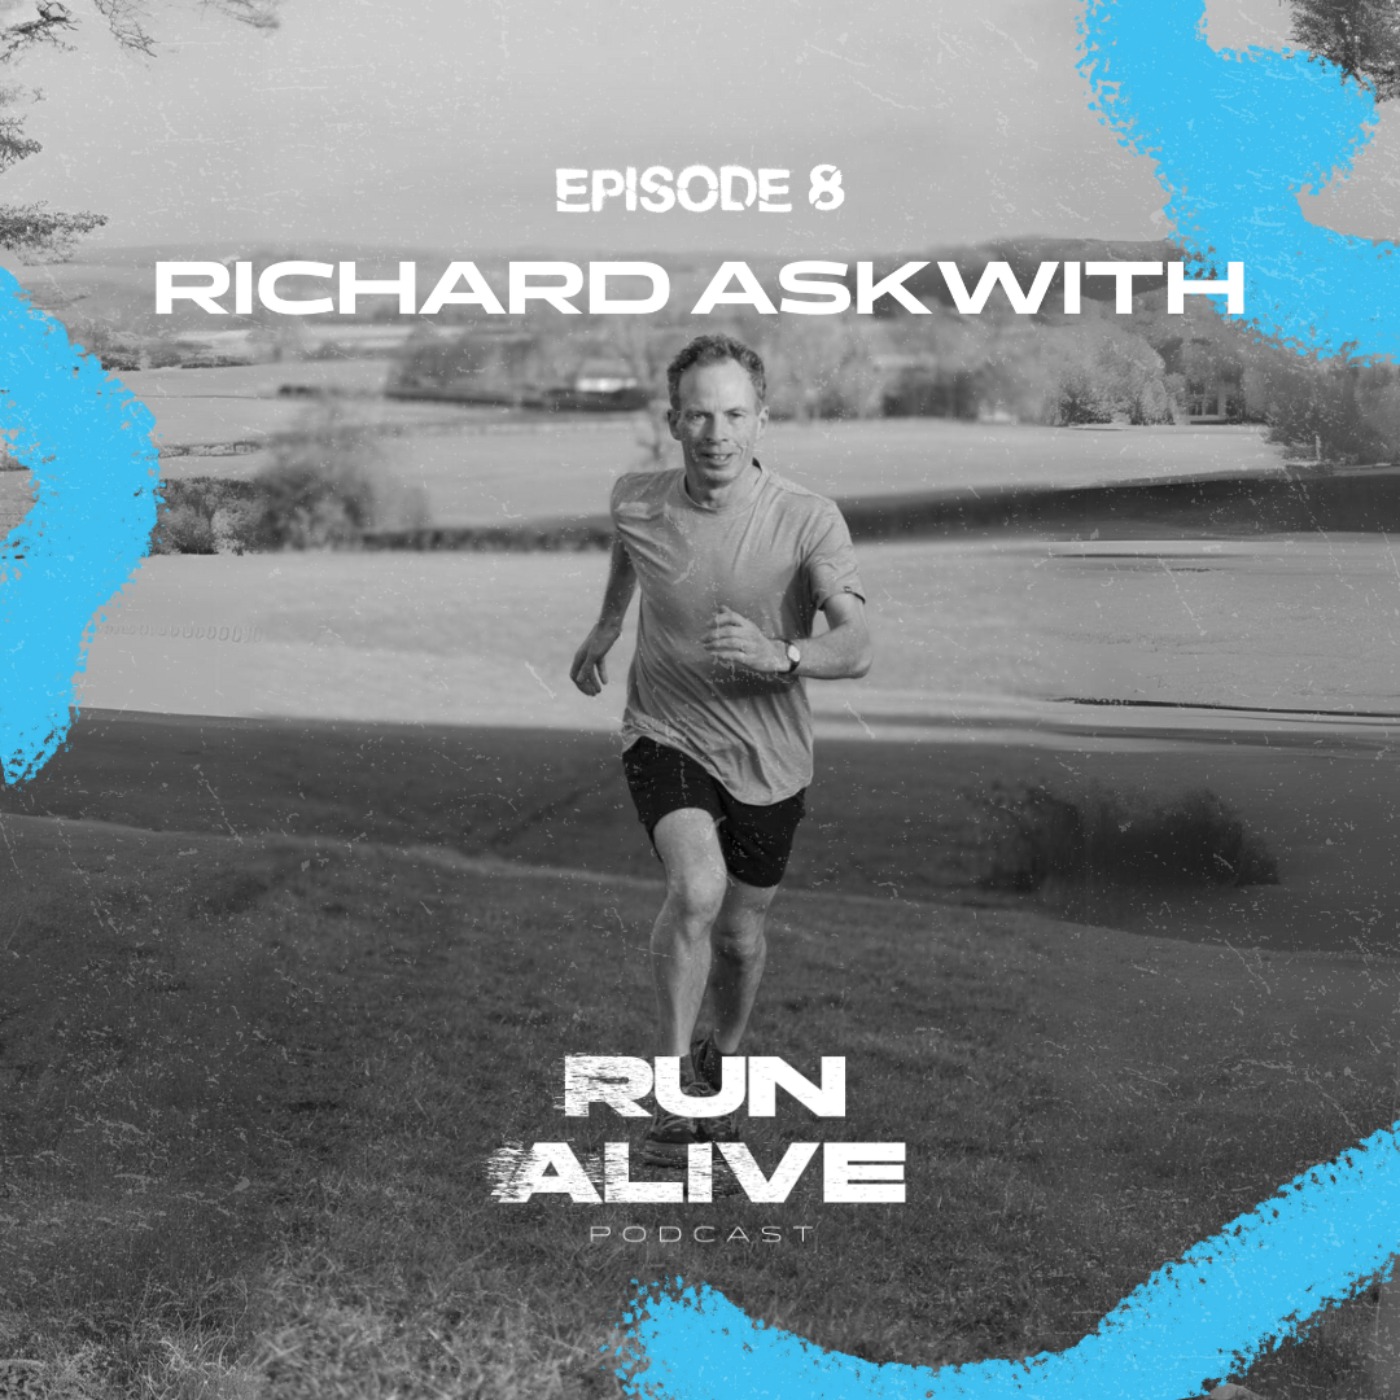 Richard Askwith - Running into later life